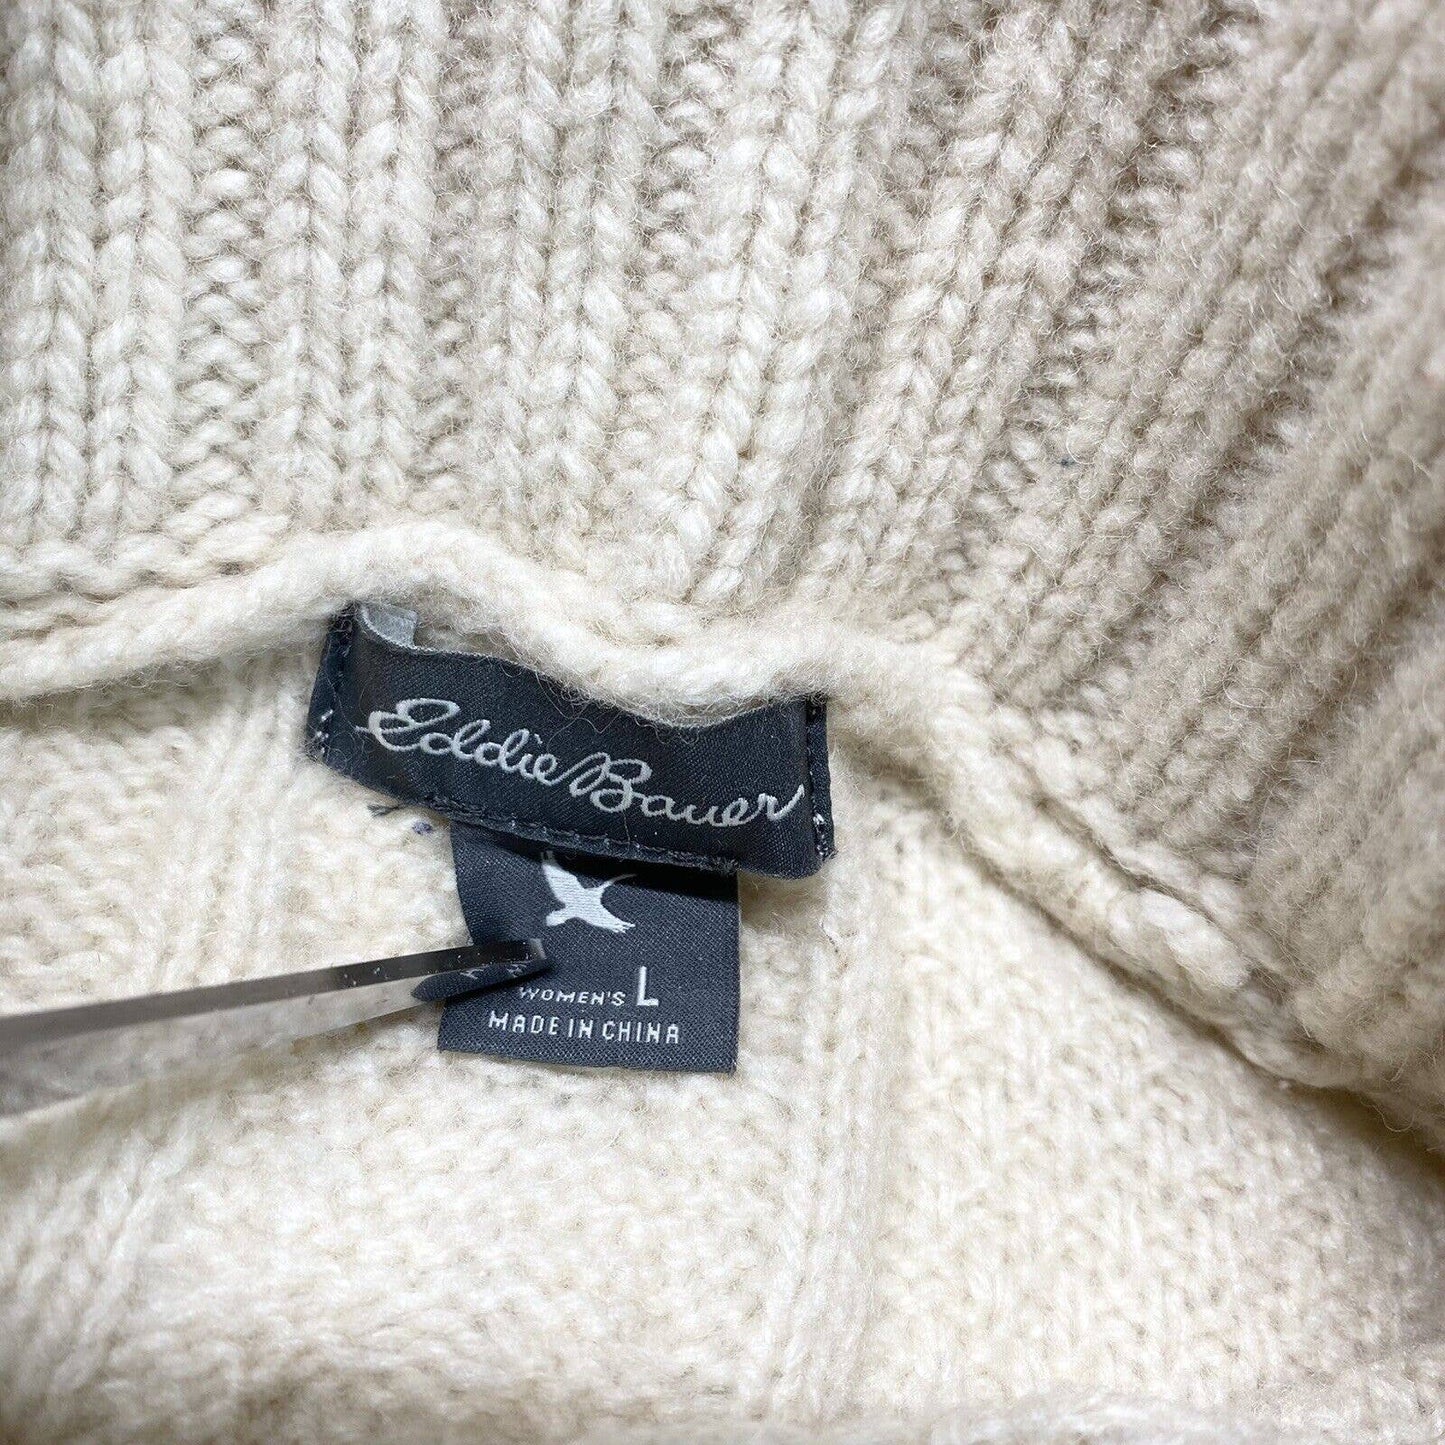 Eddie Bauer Cable Knit Sweater Sz Large Lambswool Blend Beige Turtleneck Top